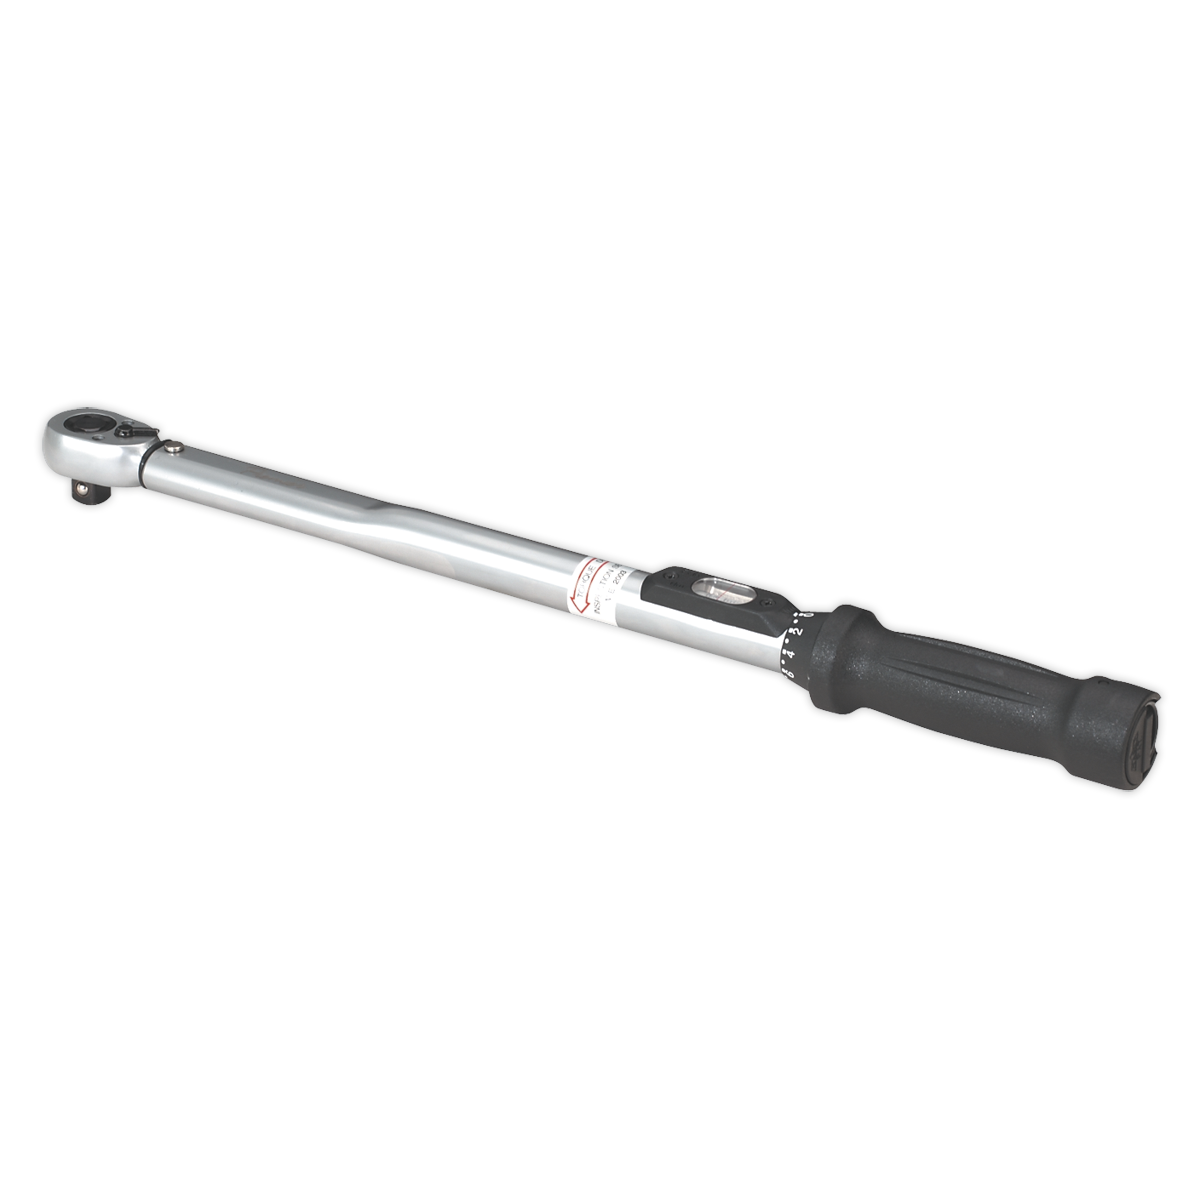 / 4% NEW Torque Wrench 1/2" Drive 40-210Nm Calibrated Certificate Tested